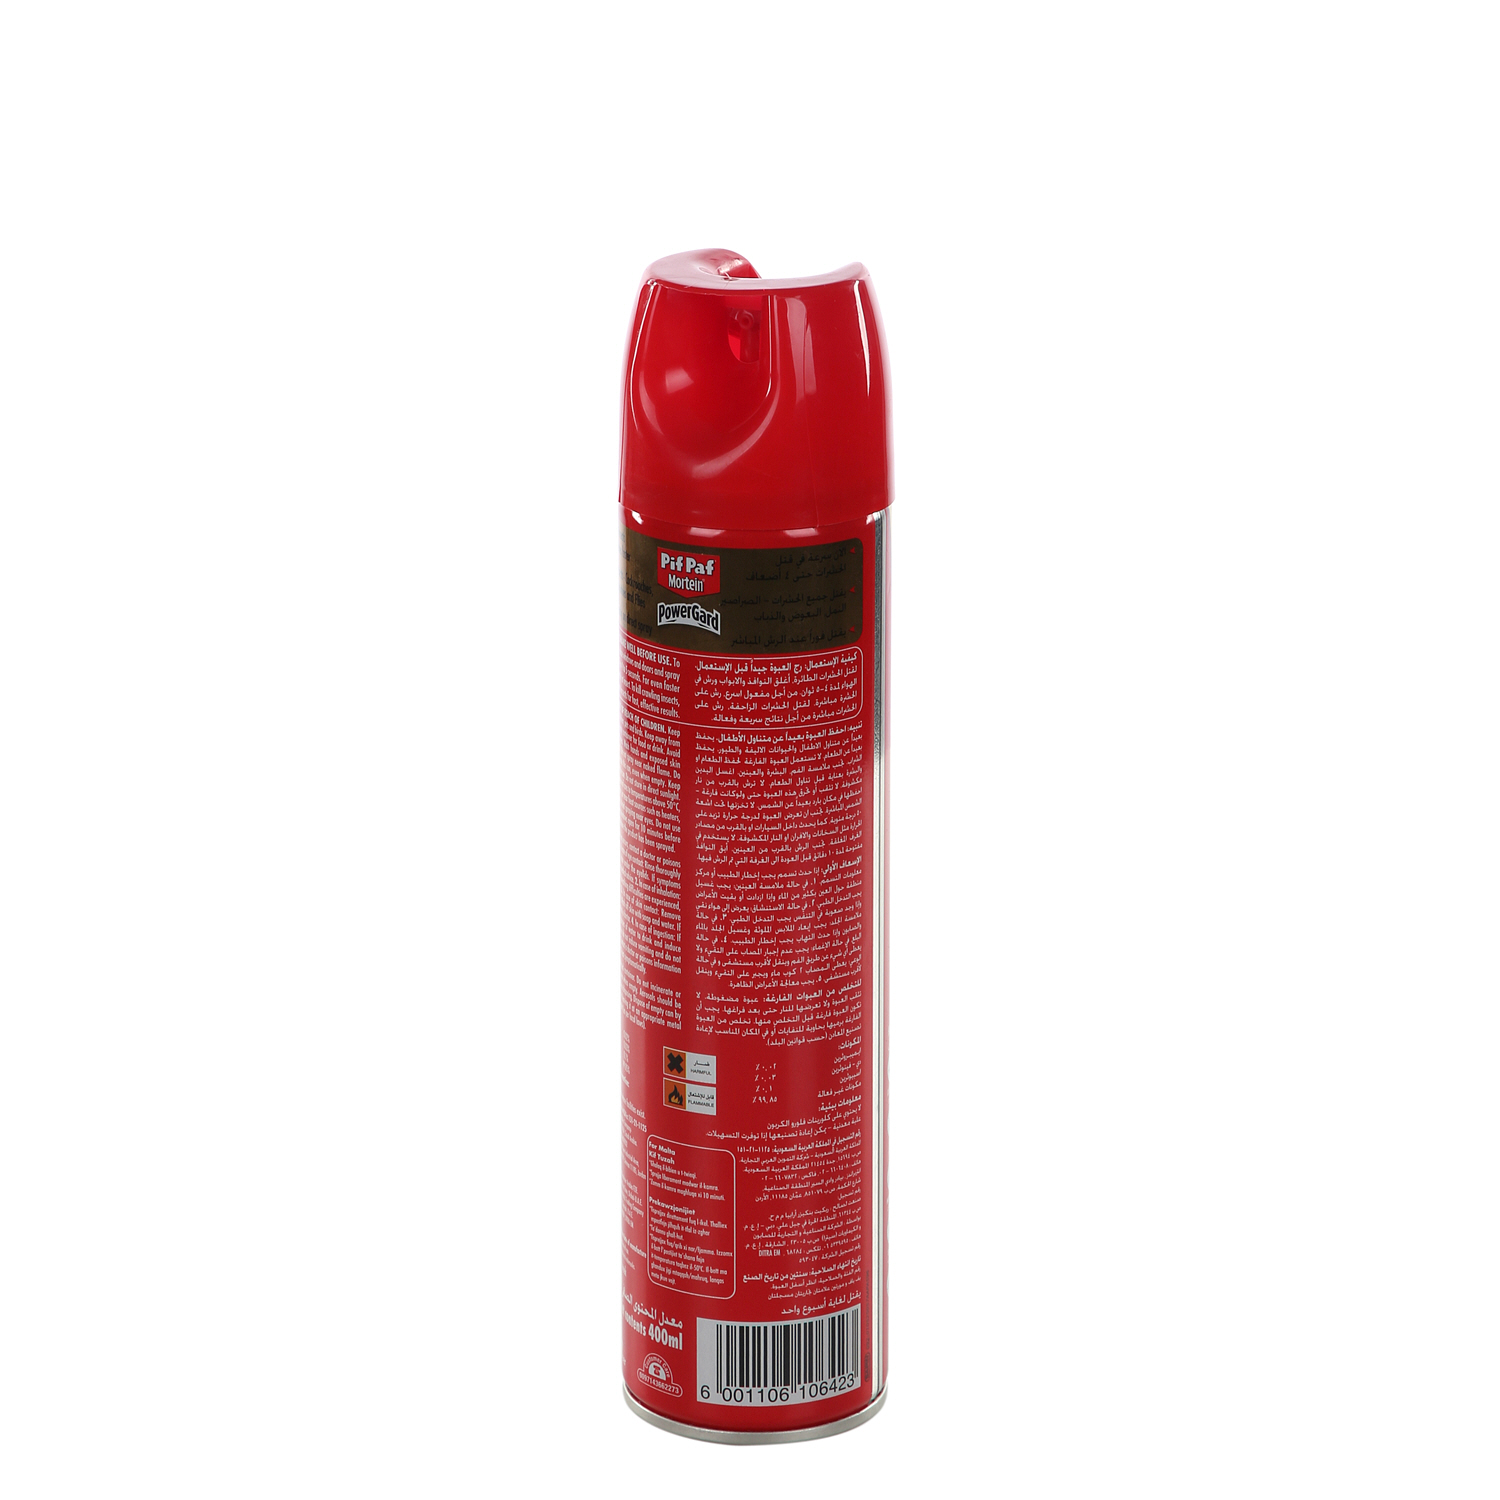 Pif Paf All Insect Killer 400 ml